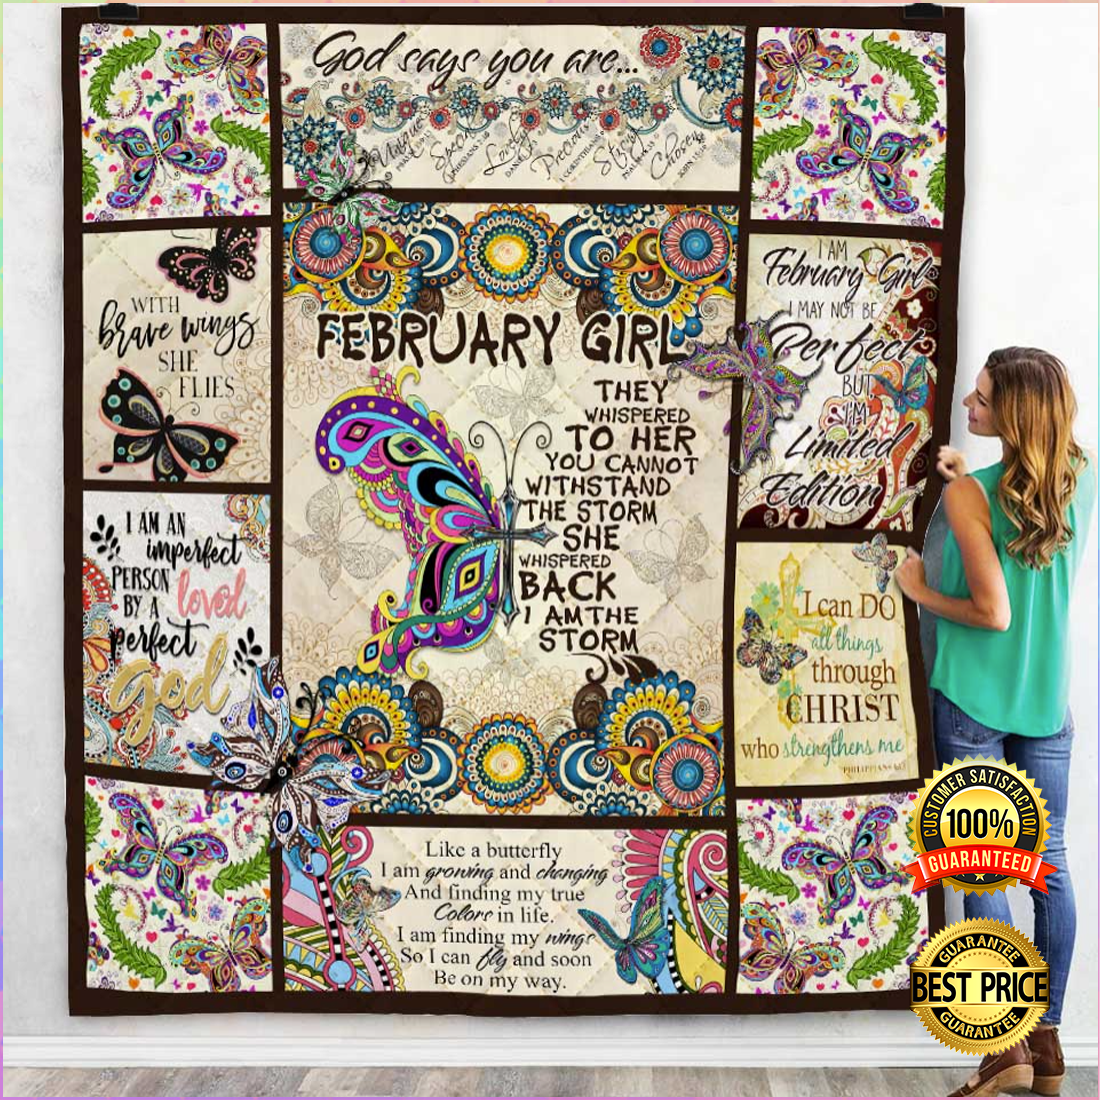 February girl they whispered to her you cannot withstand the storm quilt 5